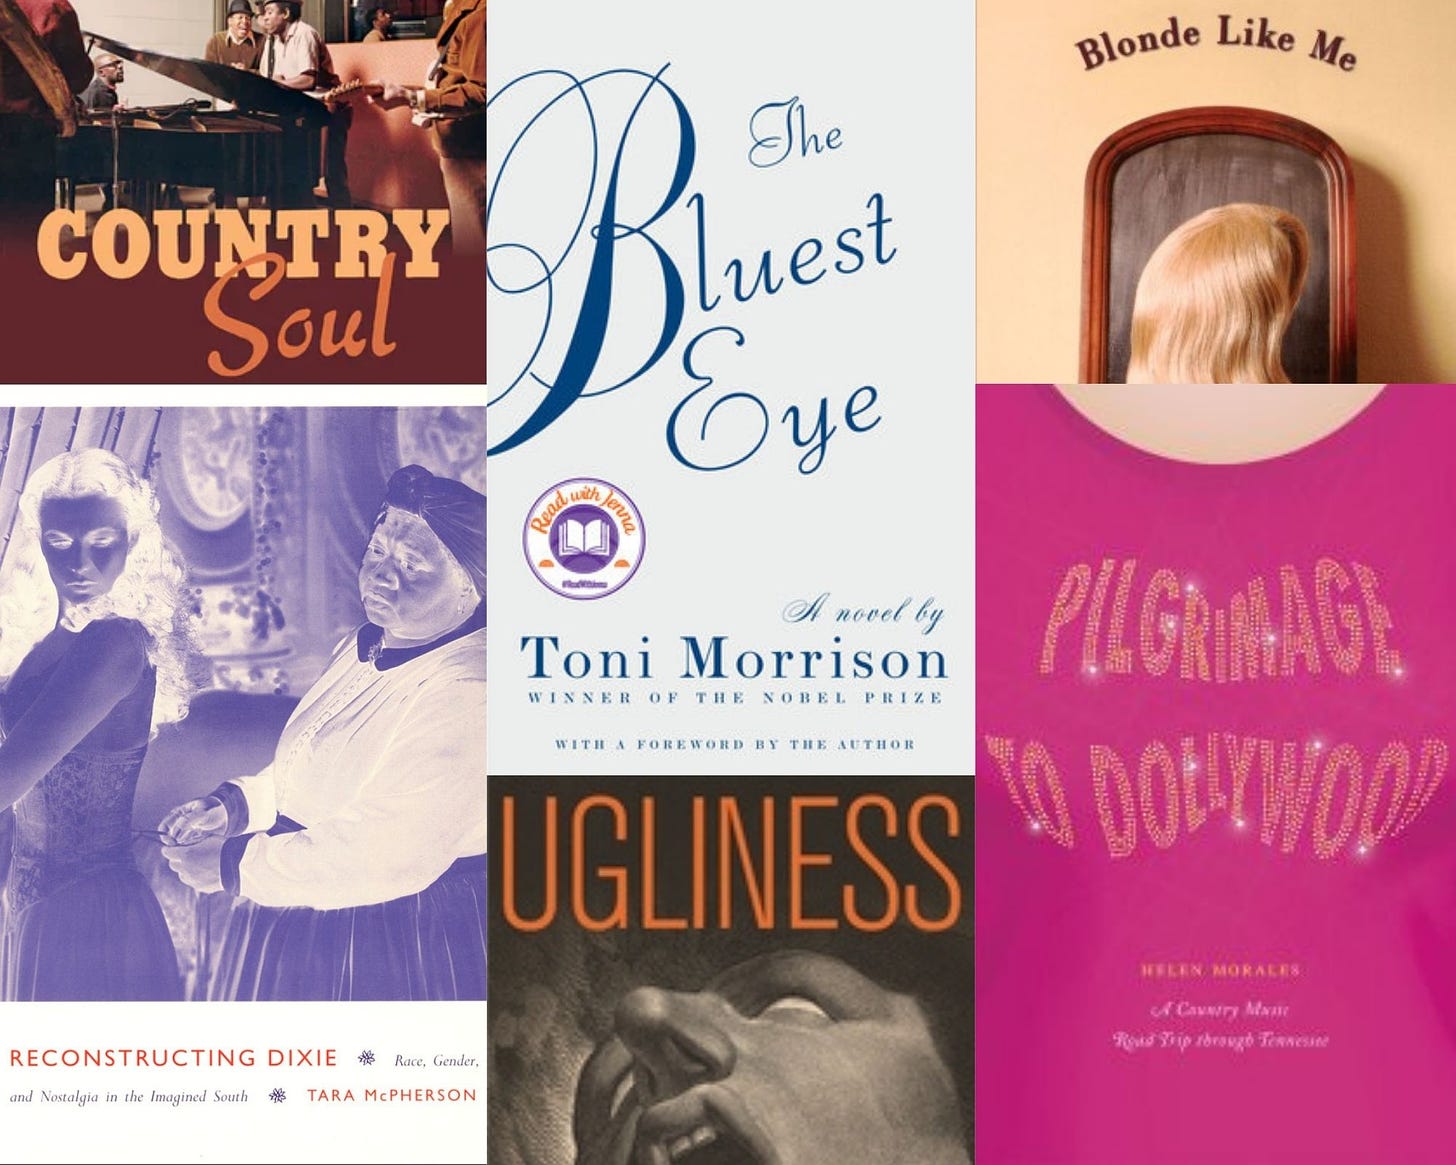 A collage of six book covers from the Dolly reading list. Those books are: Country Soul, Reconstructing Dixie, The Bluest Eye, Ugliness, Blonde Like Me, and Pilgrimage to Dollywood